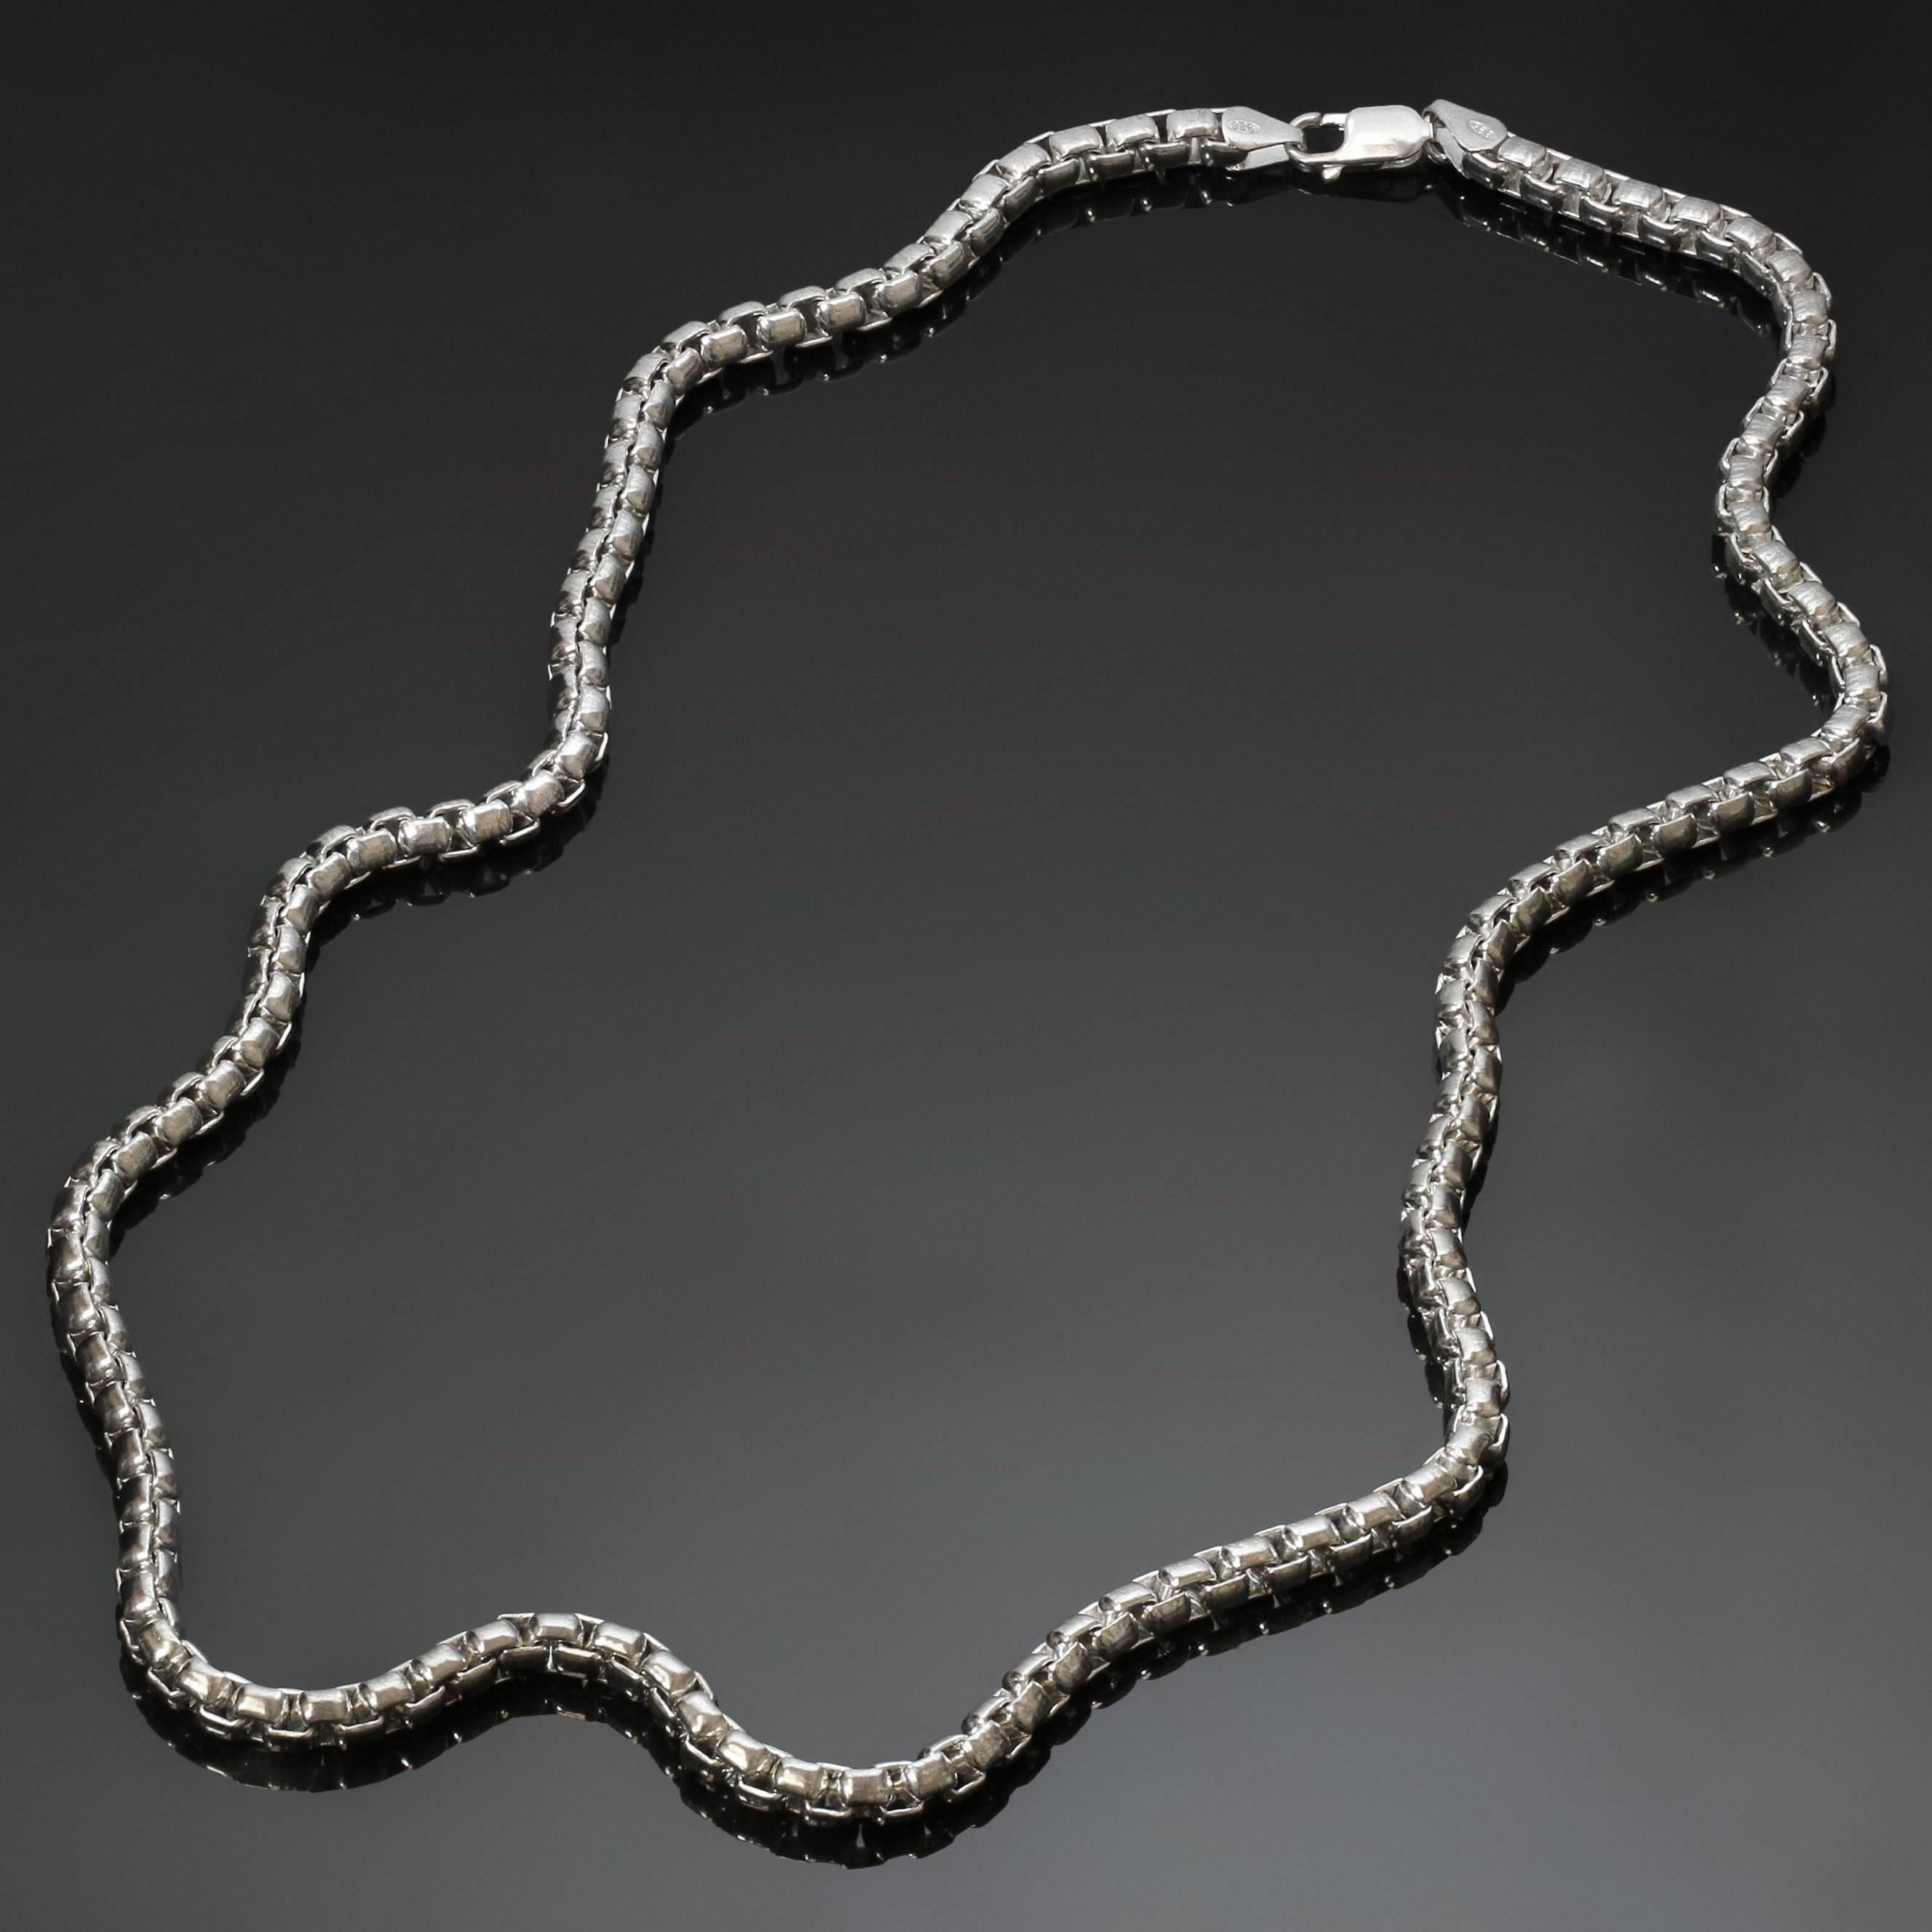 A classic unisex box chain necklace crafted in sterling silver. Made in United States. Measurements: 0.19